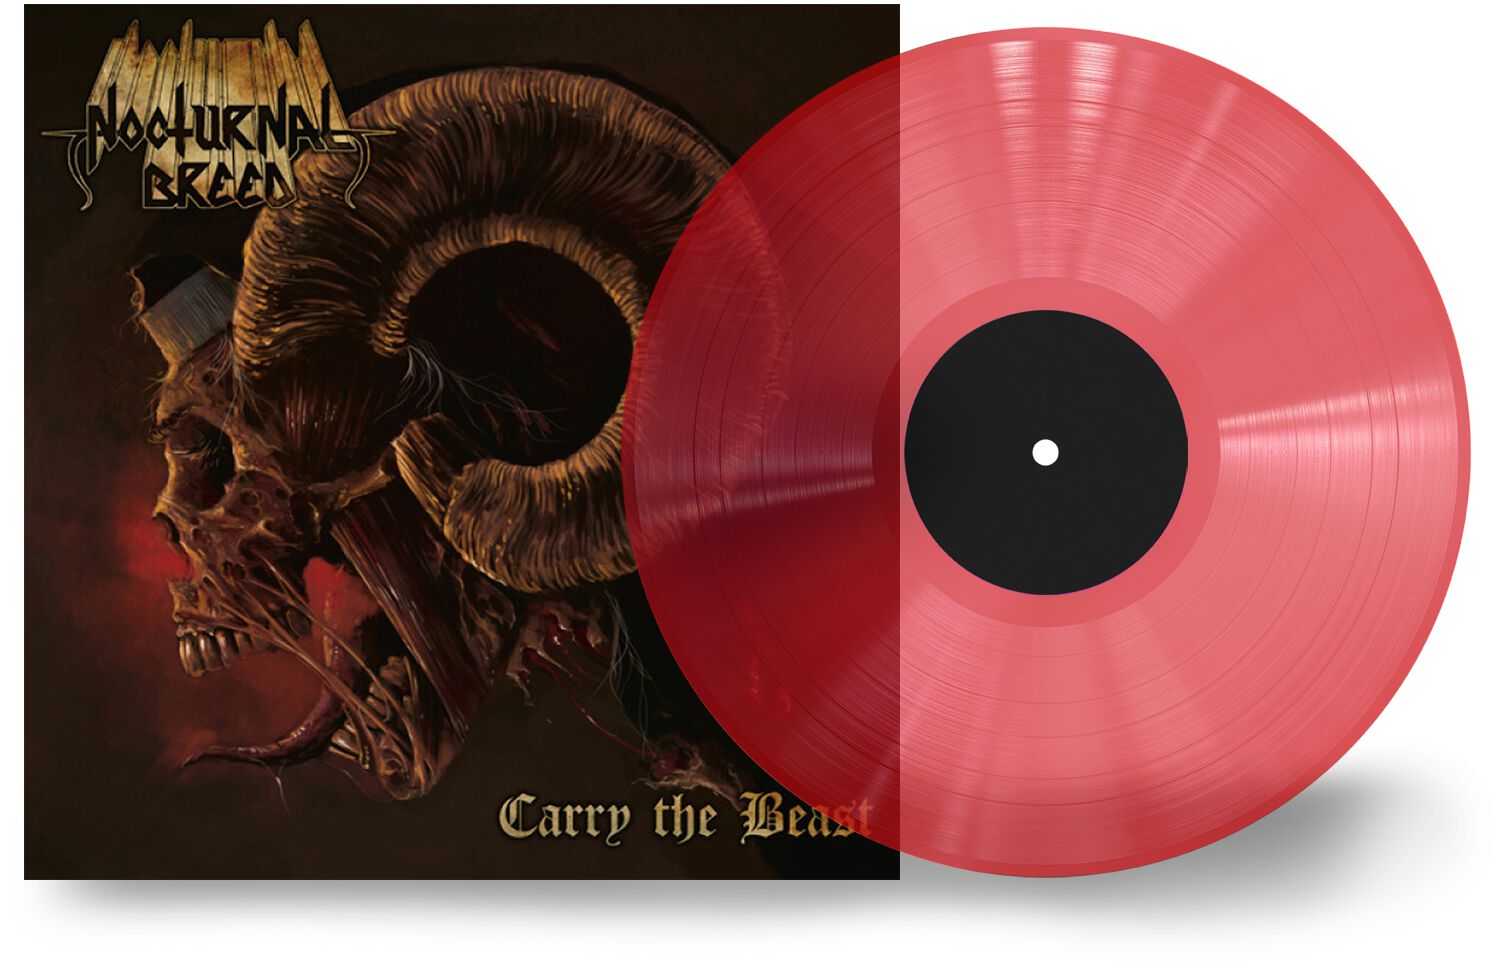 Carry the beast von Nocturnal Breed - LP (Coloured, Limited Edition, Standard)